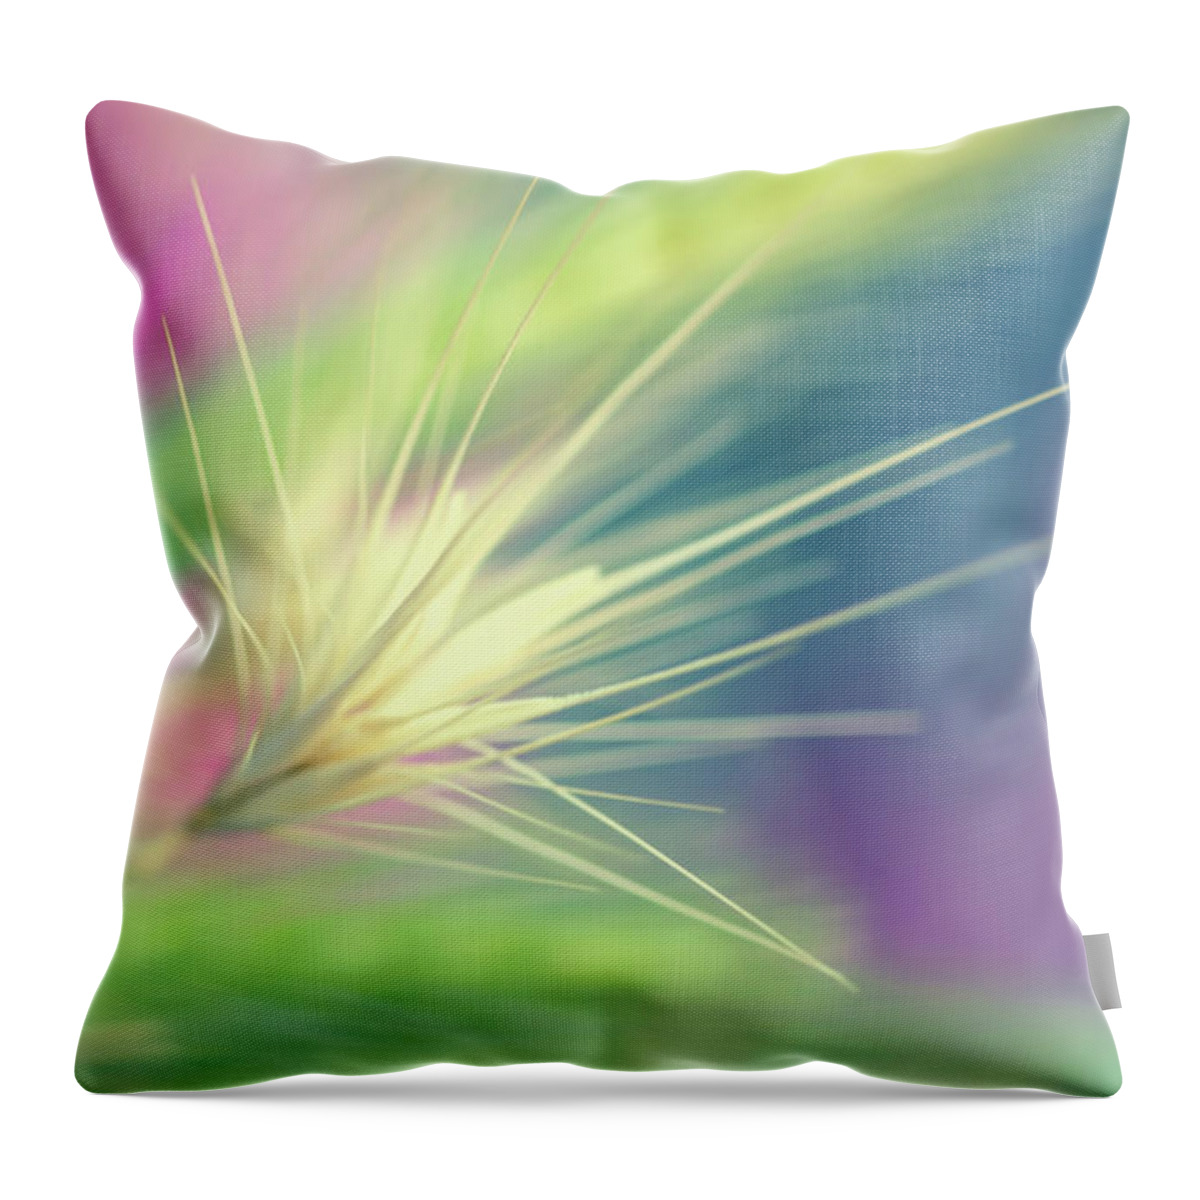 Photography Throw Pillow featuring the digital art Bright Weed by Terry Davis